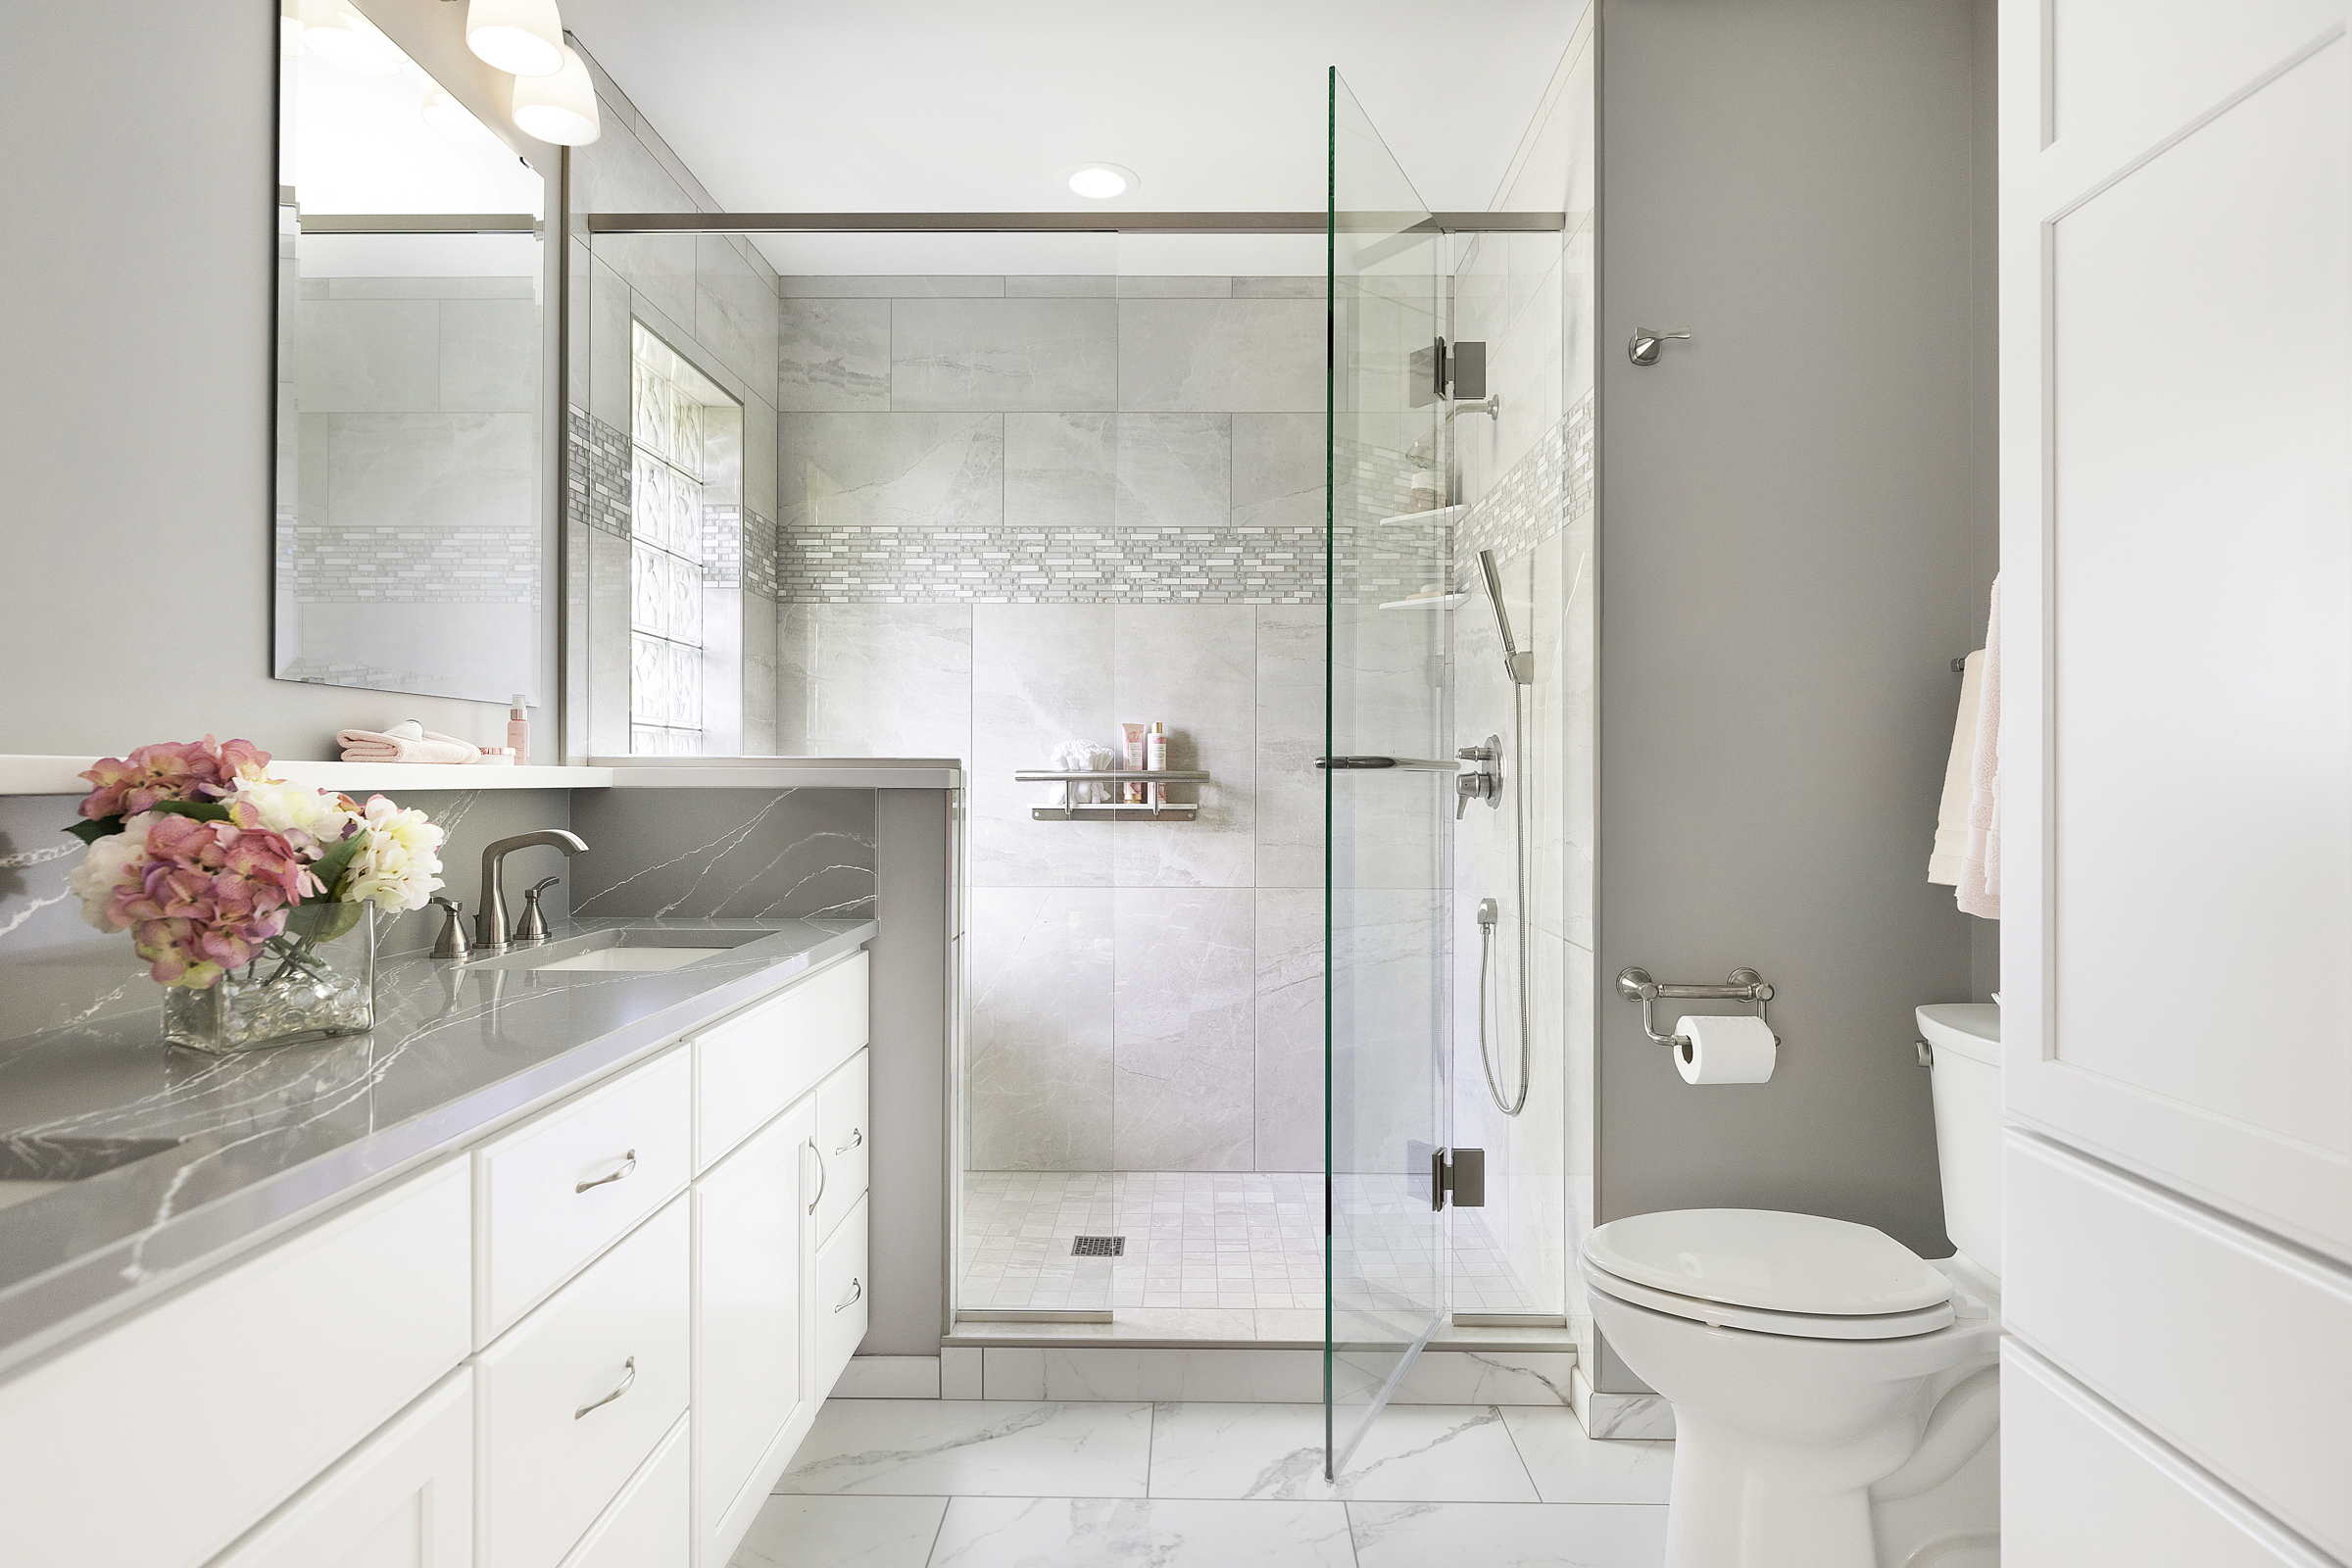 Bathroom renovation with glass walk in shower, white vanity, and large marble floor tile